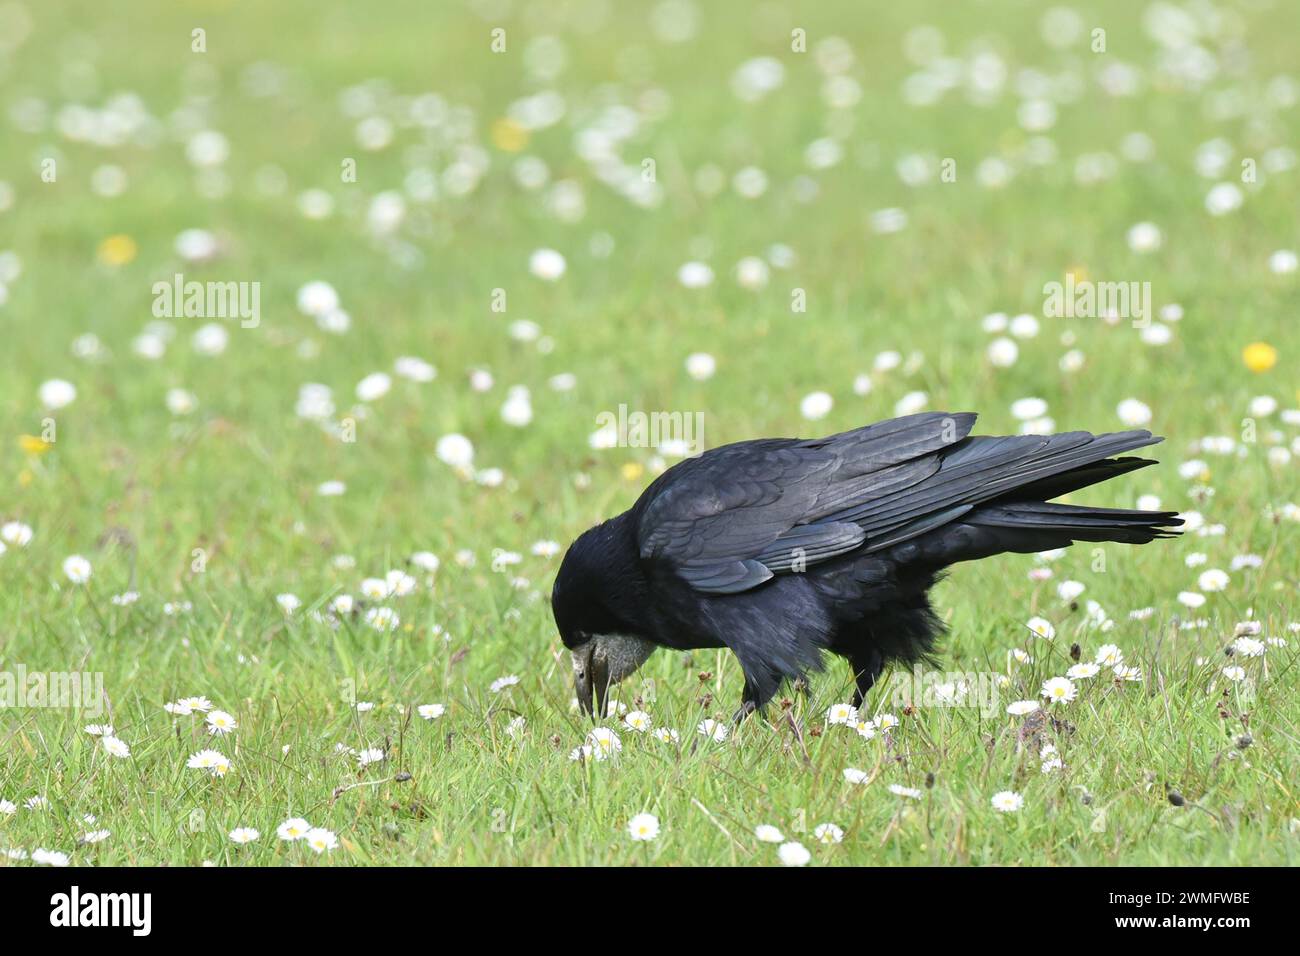 The rook (Corvus frugilegus)  is a large, black-feathered bird, distinguished from similar species by the whitish featherless area on the face Stock Photo